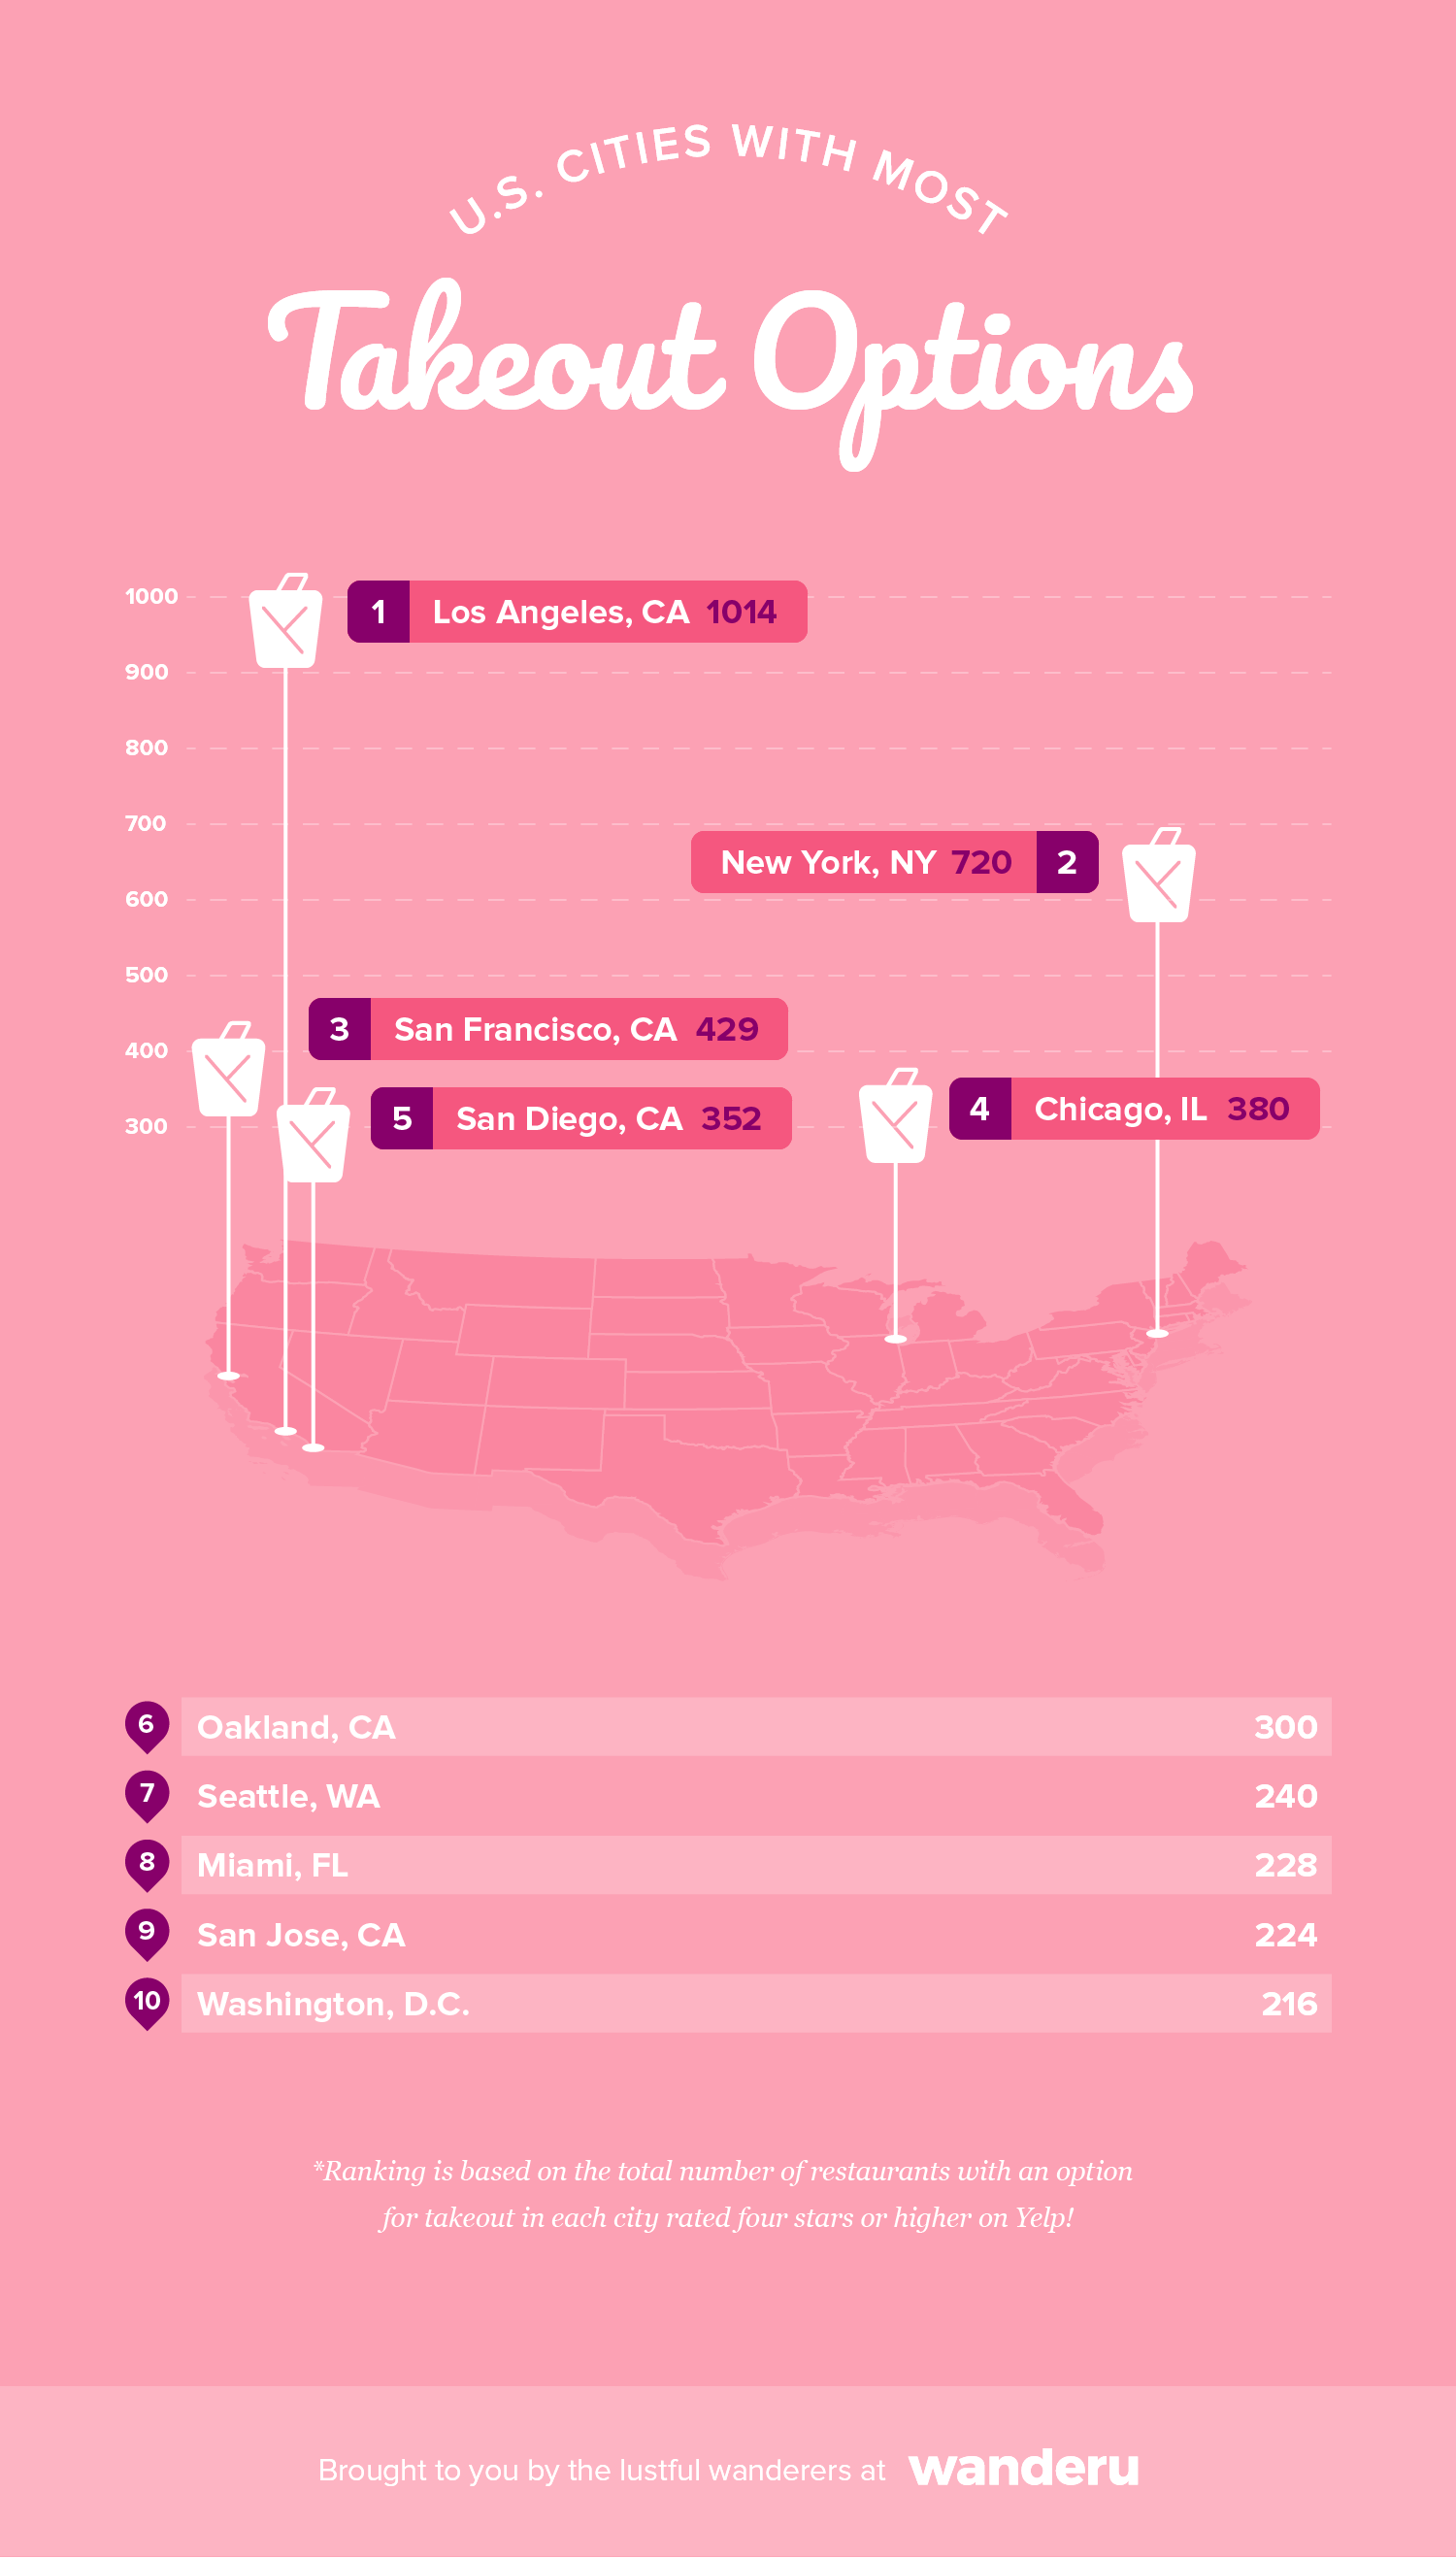 Graphic lists out the top 10 U.S. cities with most options to order takeout.